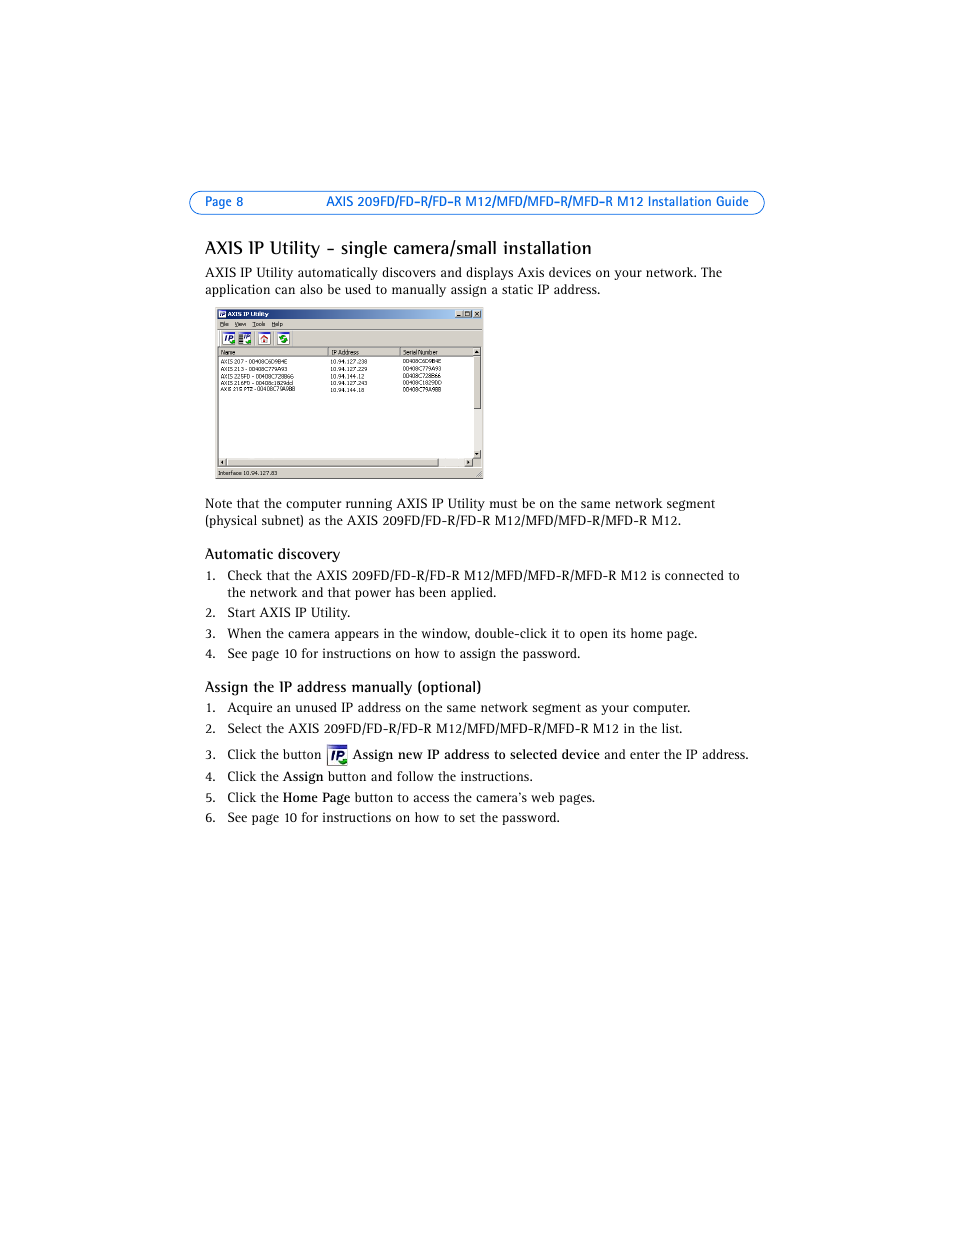 Axis ip utility - single camera/small installation | Axis Communications  AXIS 209MFD User Manual | Page 8 / 73